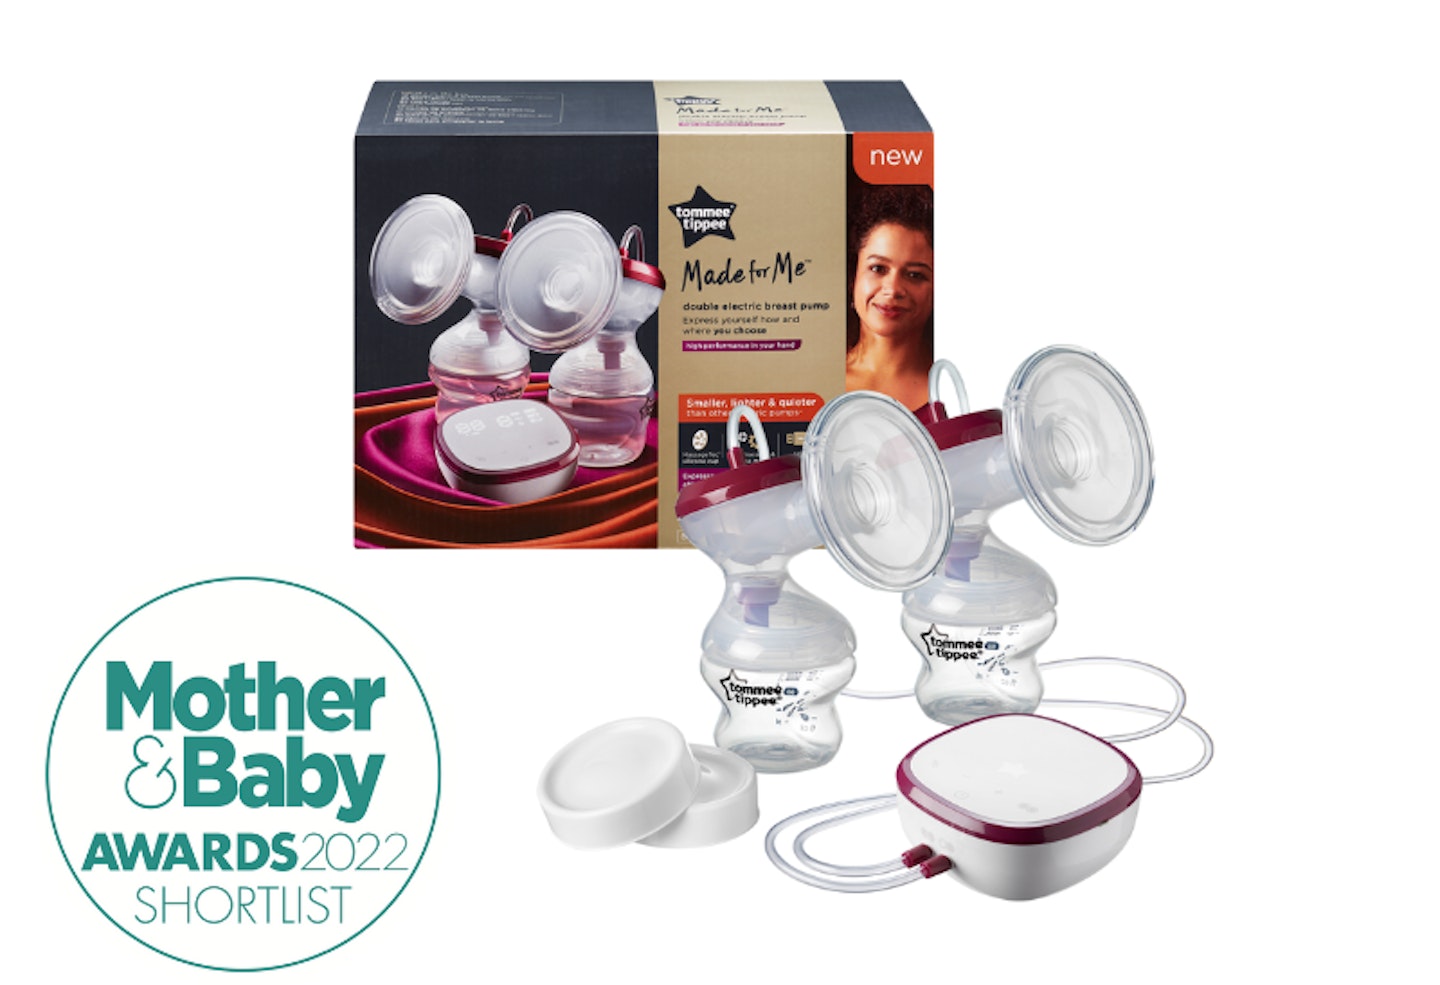 Tommee Tippee Made for Me Silicone Breast Pump at Babies R Us